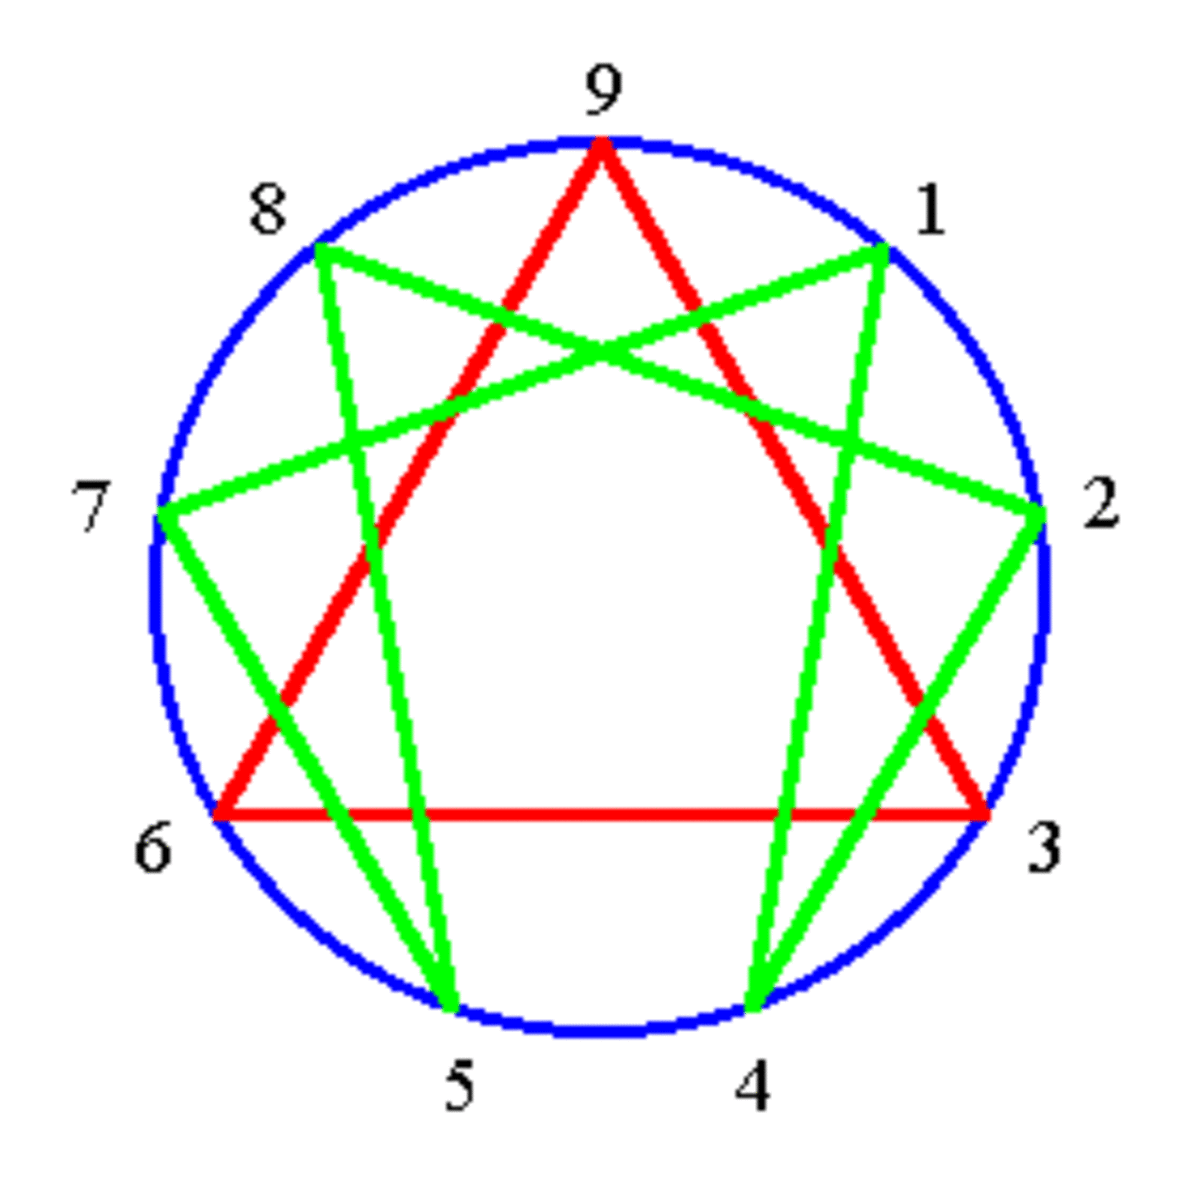 Each colored line represents one of the 3 stages